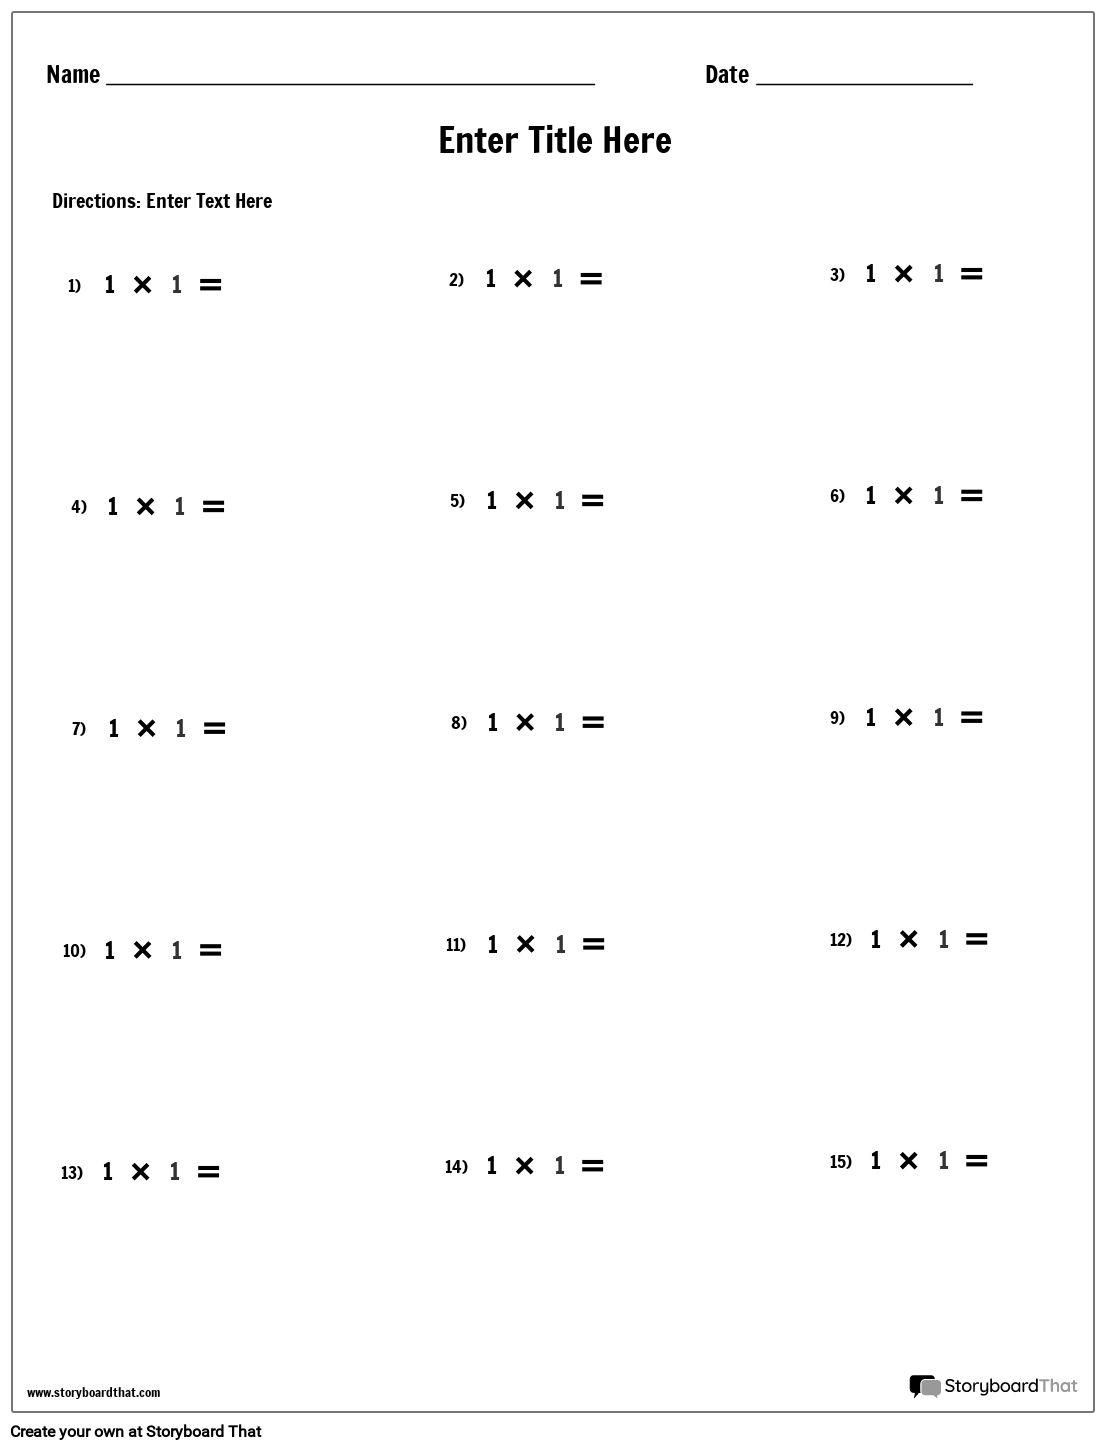 multiplication-worksheets-4-digits-by-4-digits-jay-sheets